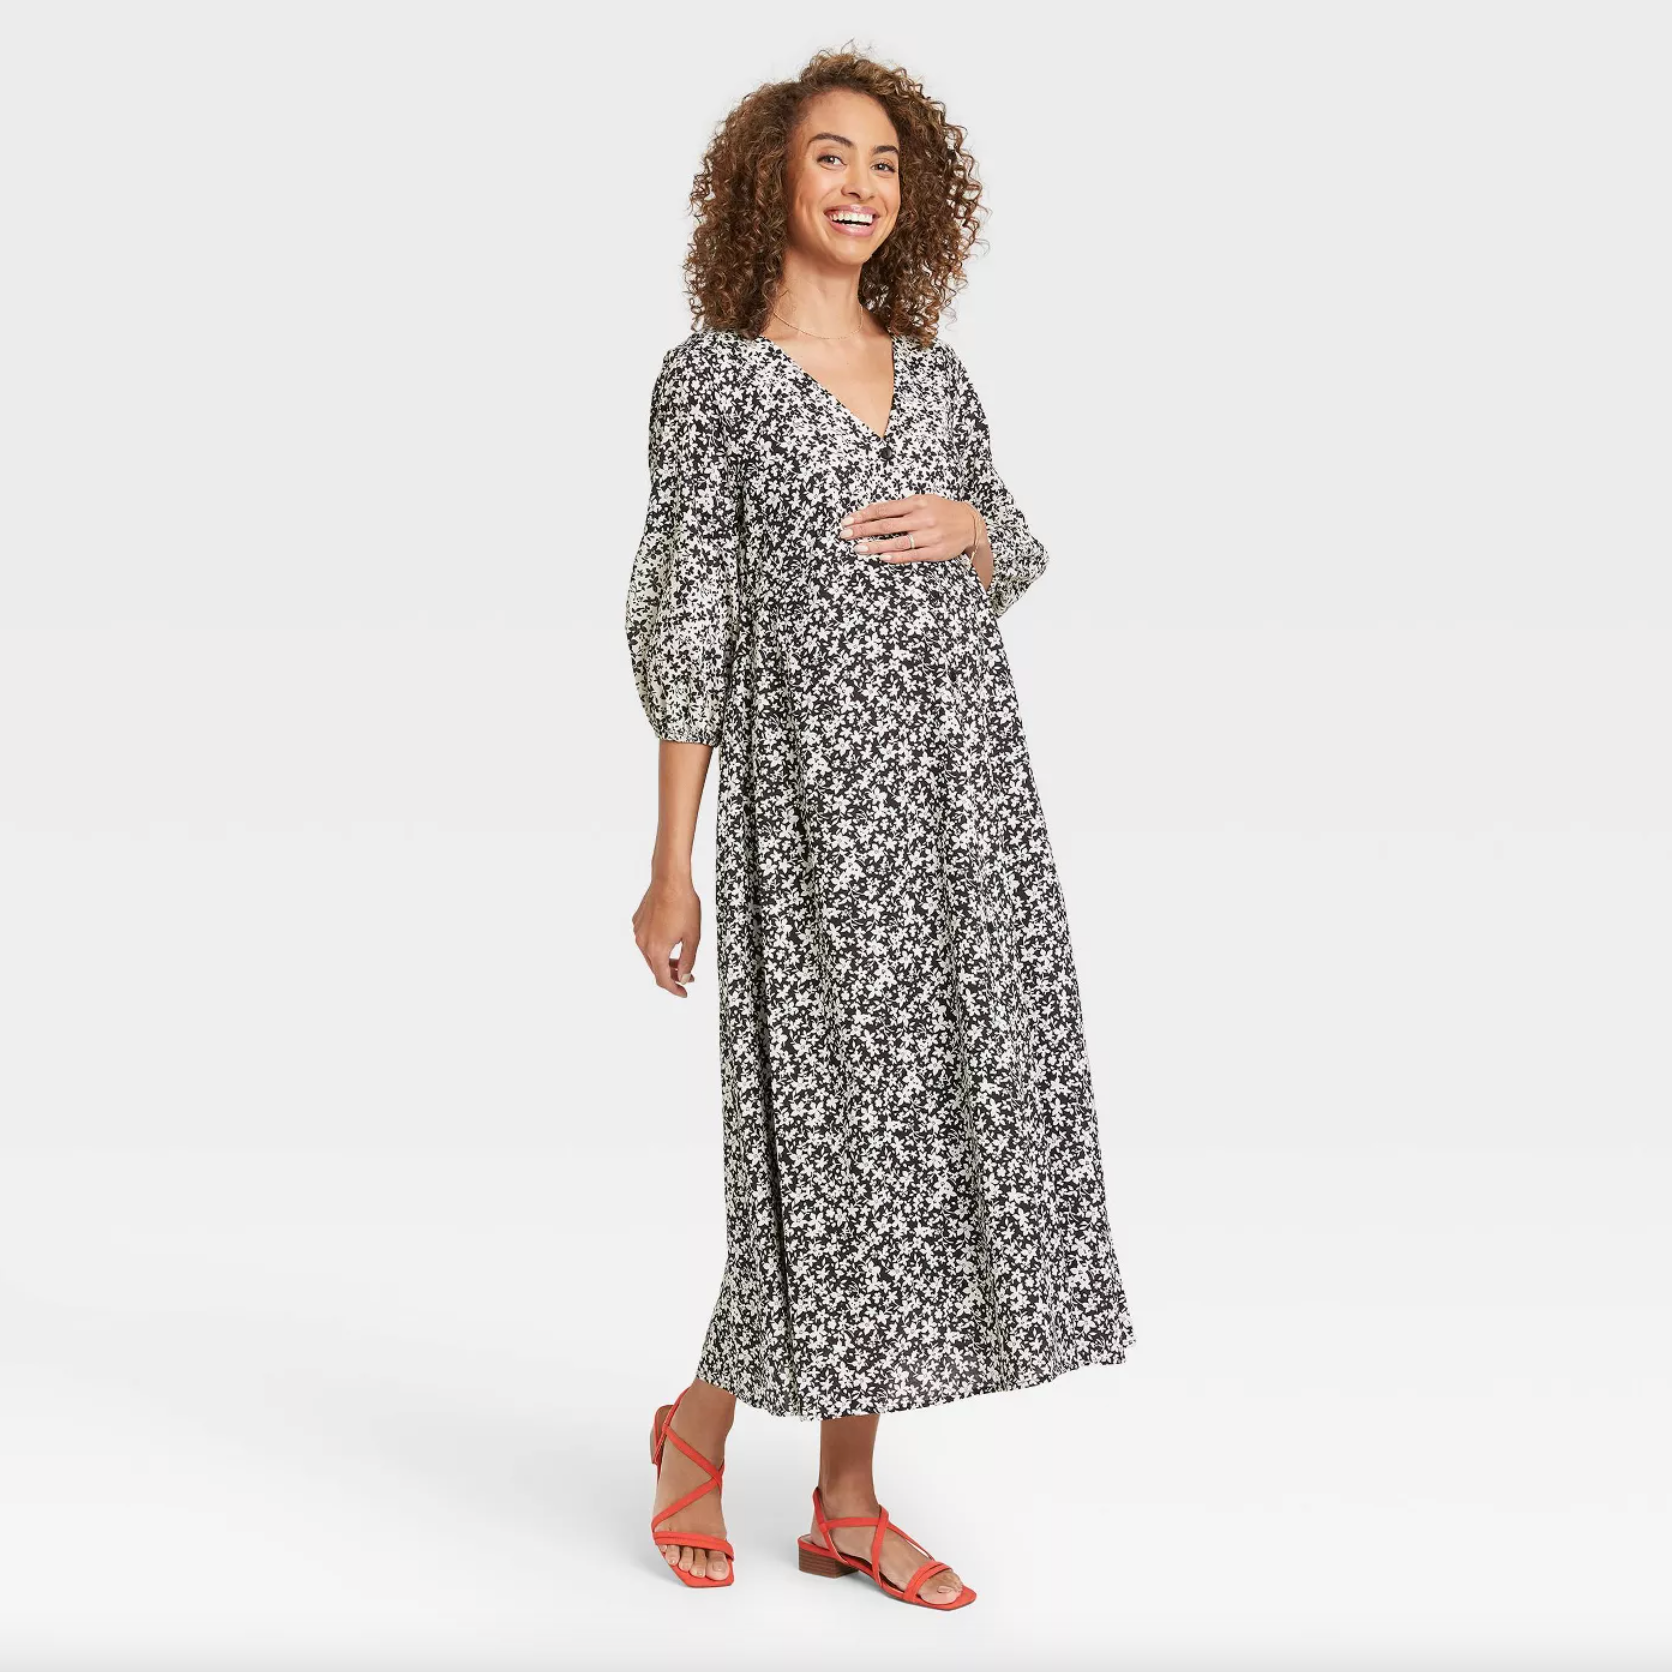 The Nines by HATCH Floral Print 3/4 Sleeve Button-Front Poplin Maternity Dress